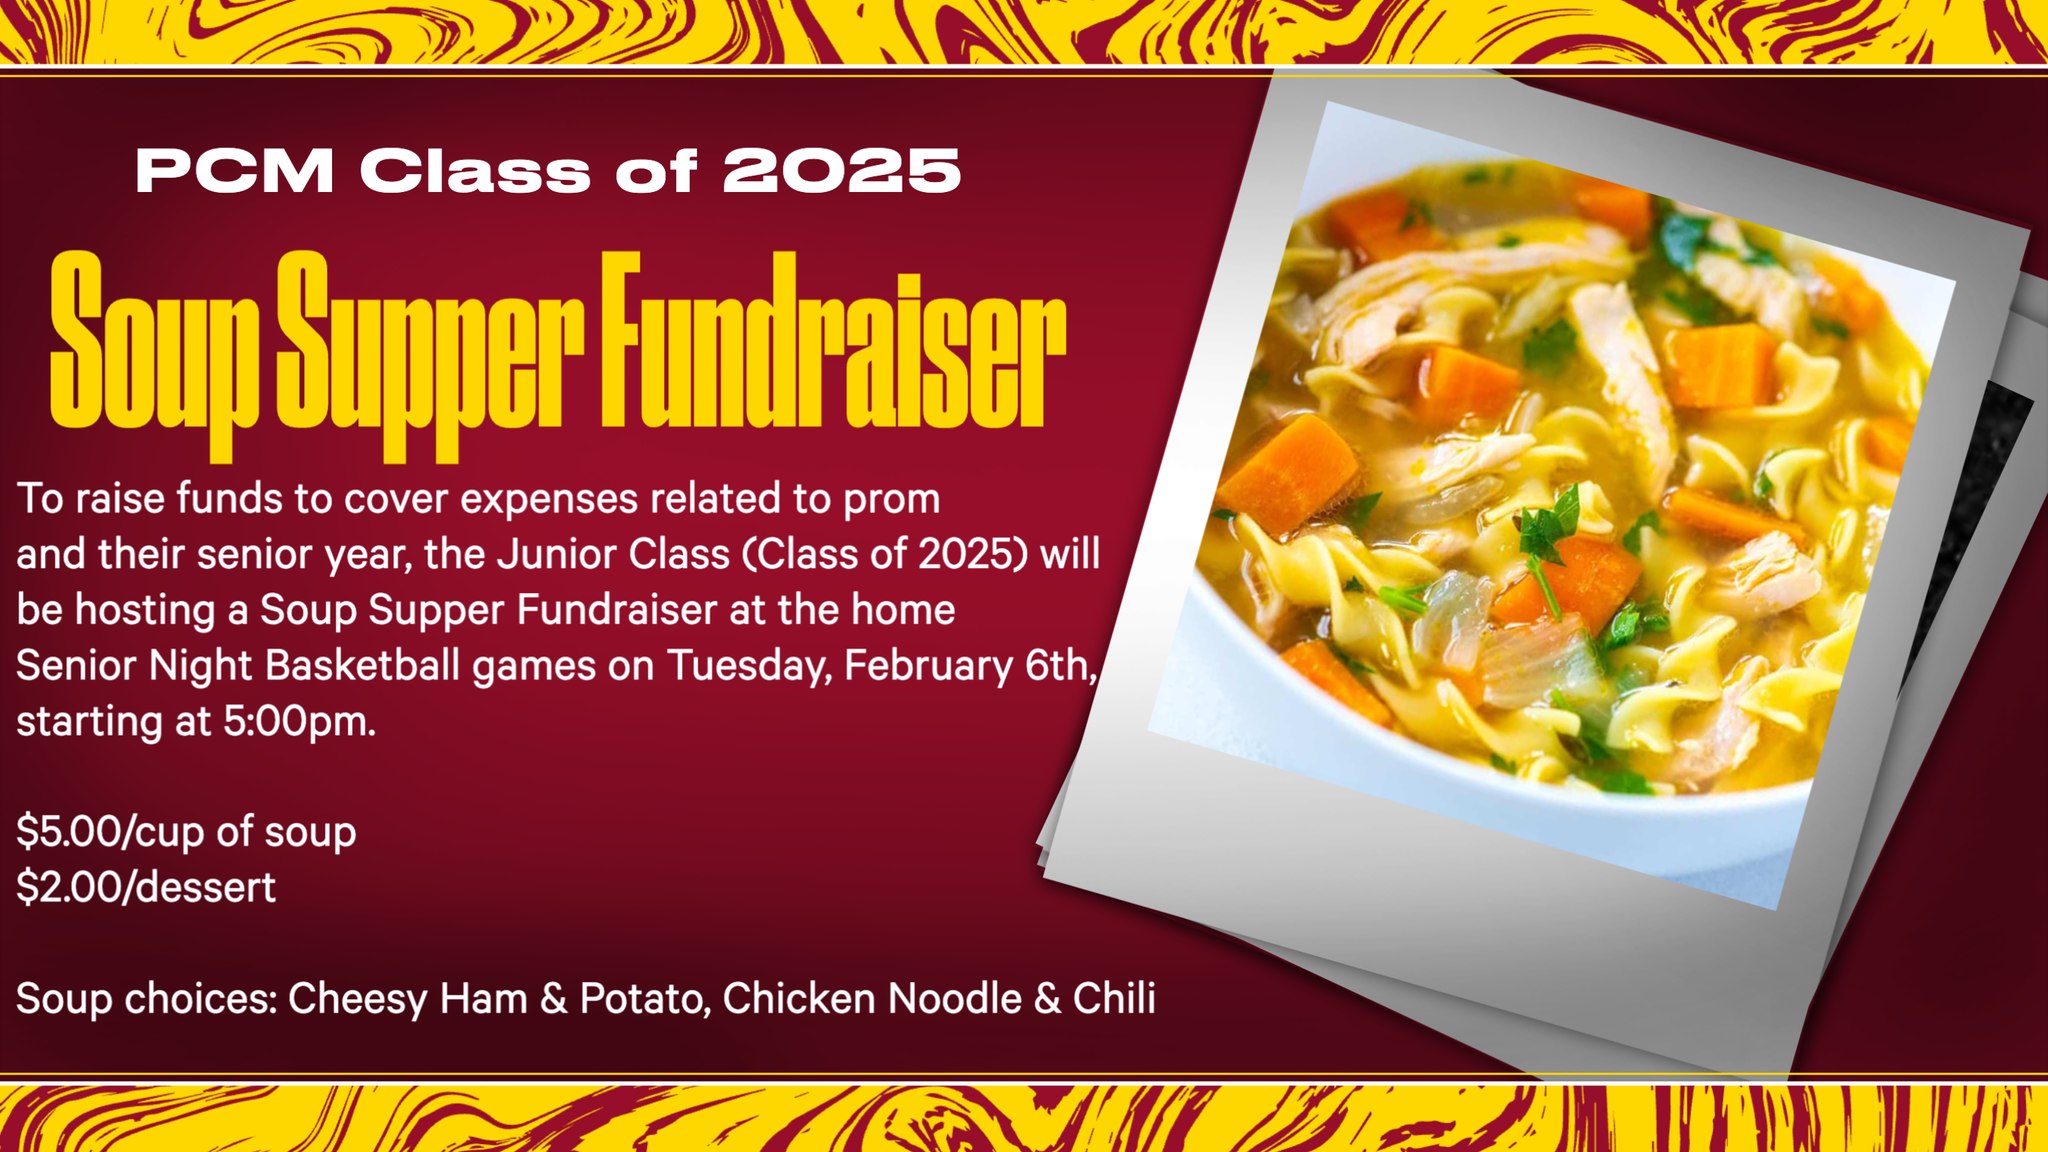 <h1 class="tribe-events-single-event-title">PCM Class Of 2025 Fund Raiser</h1>